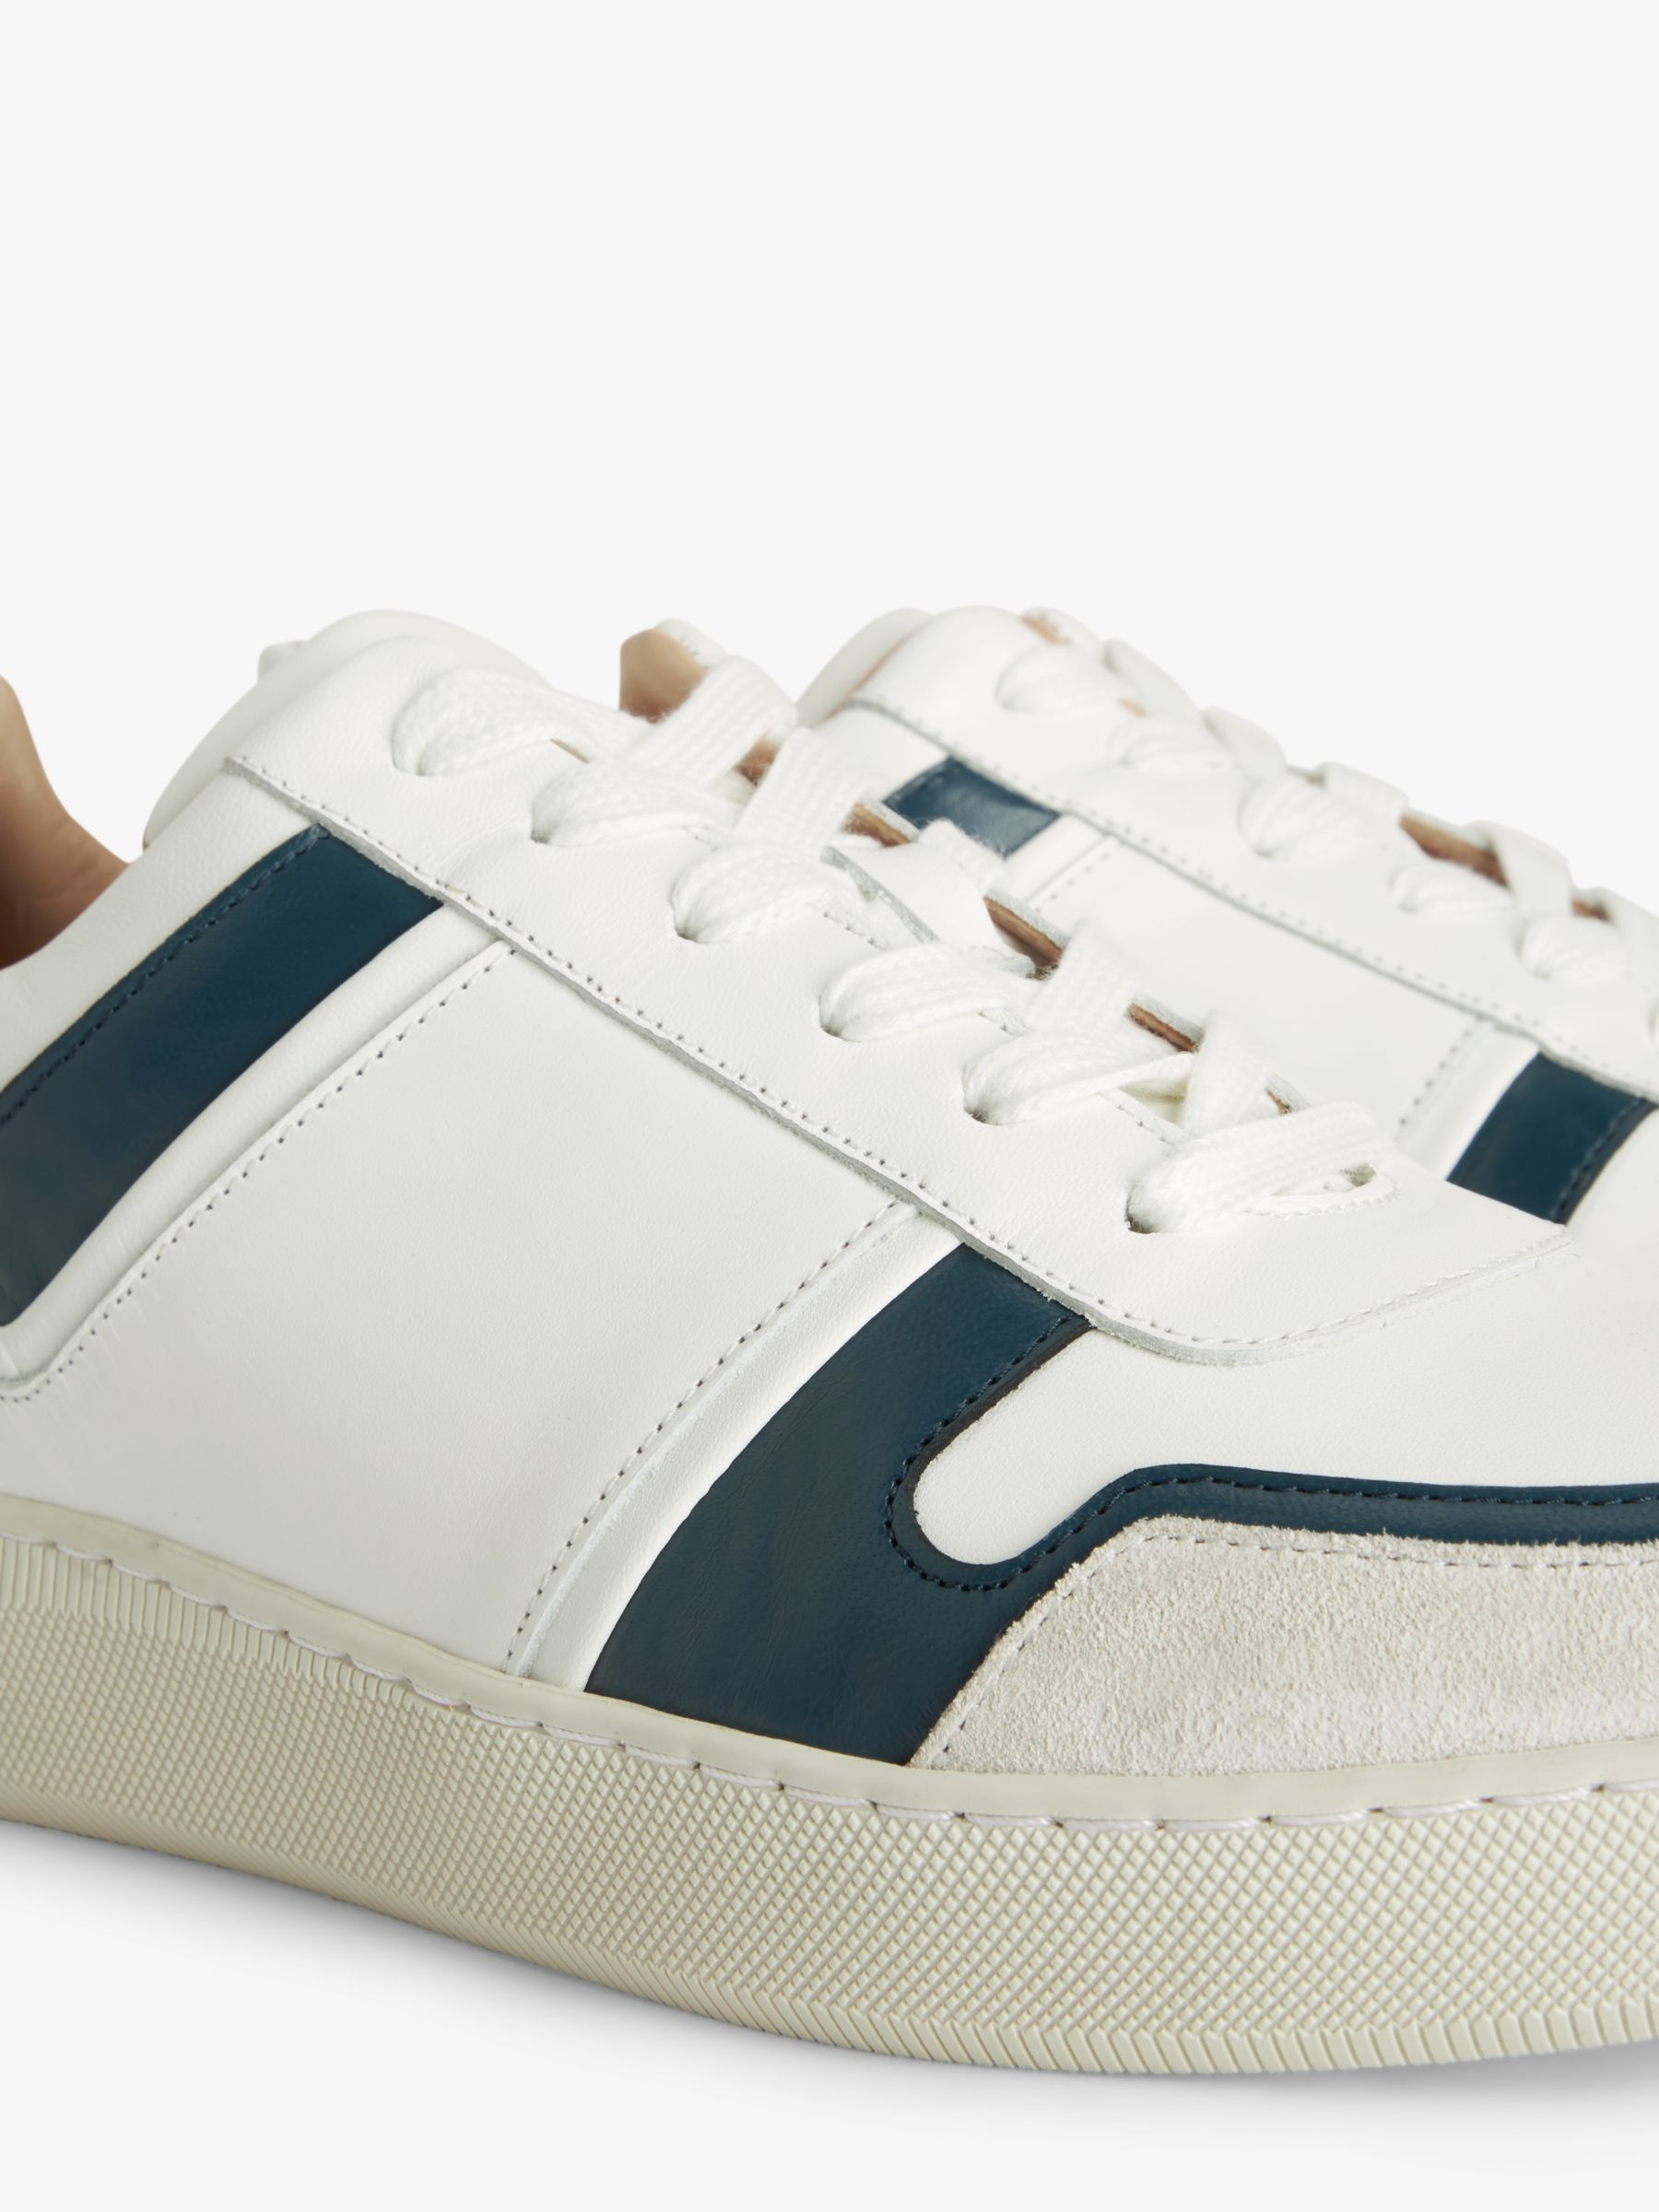 Buy John Lewis Flynne Leather Lace Up Cupsole Trainers, White/Teal Online at johnlewis.com